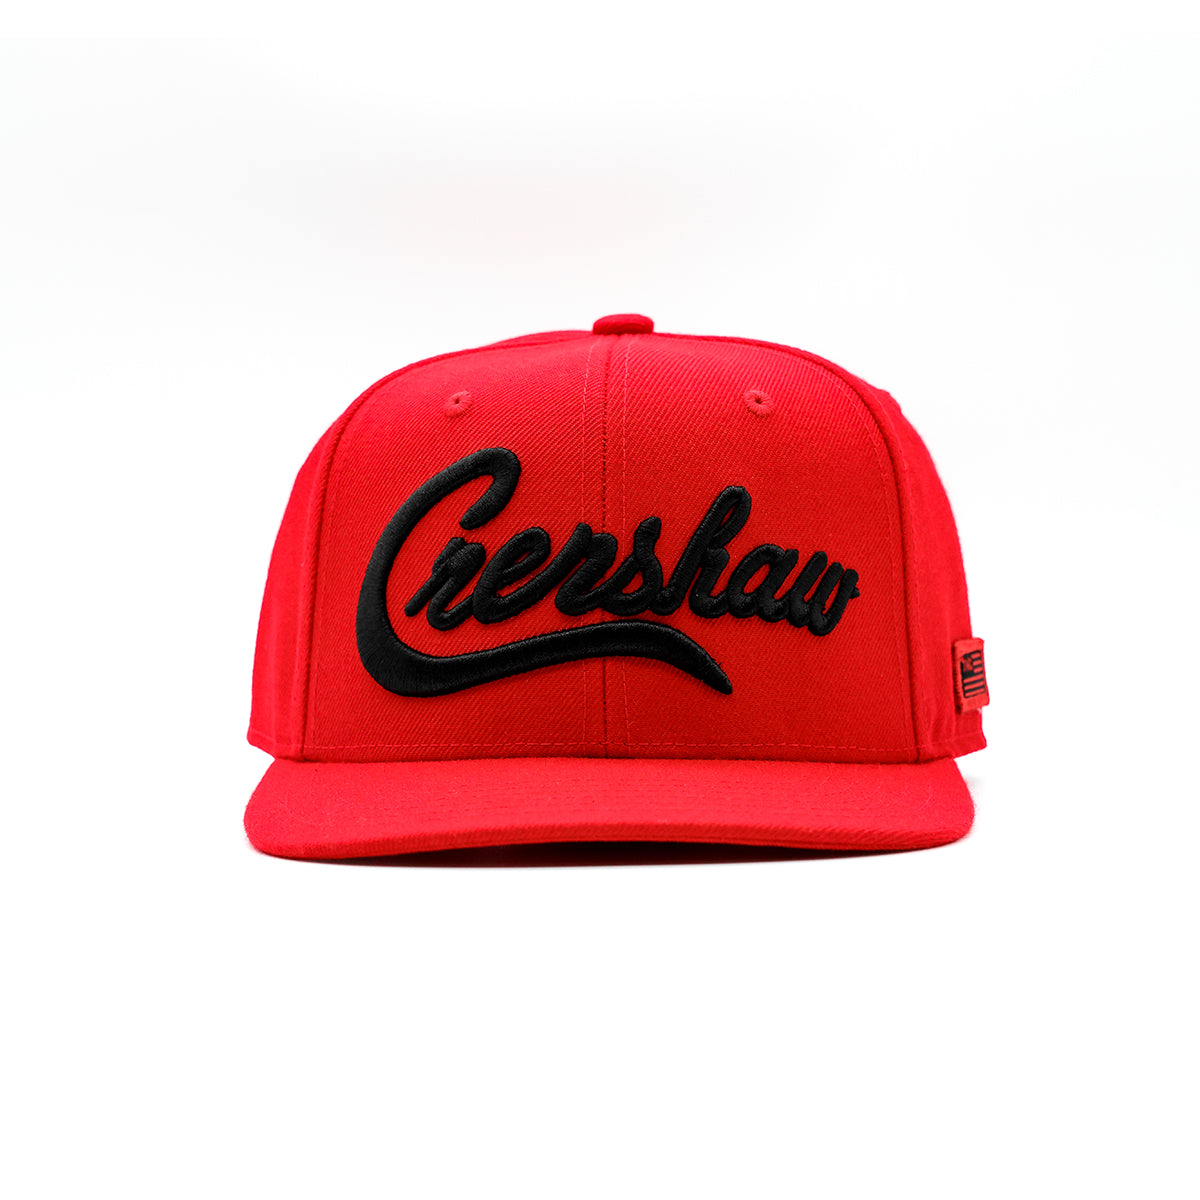 Crenshaw Limited Edition Snapback - Red/Black - Front